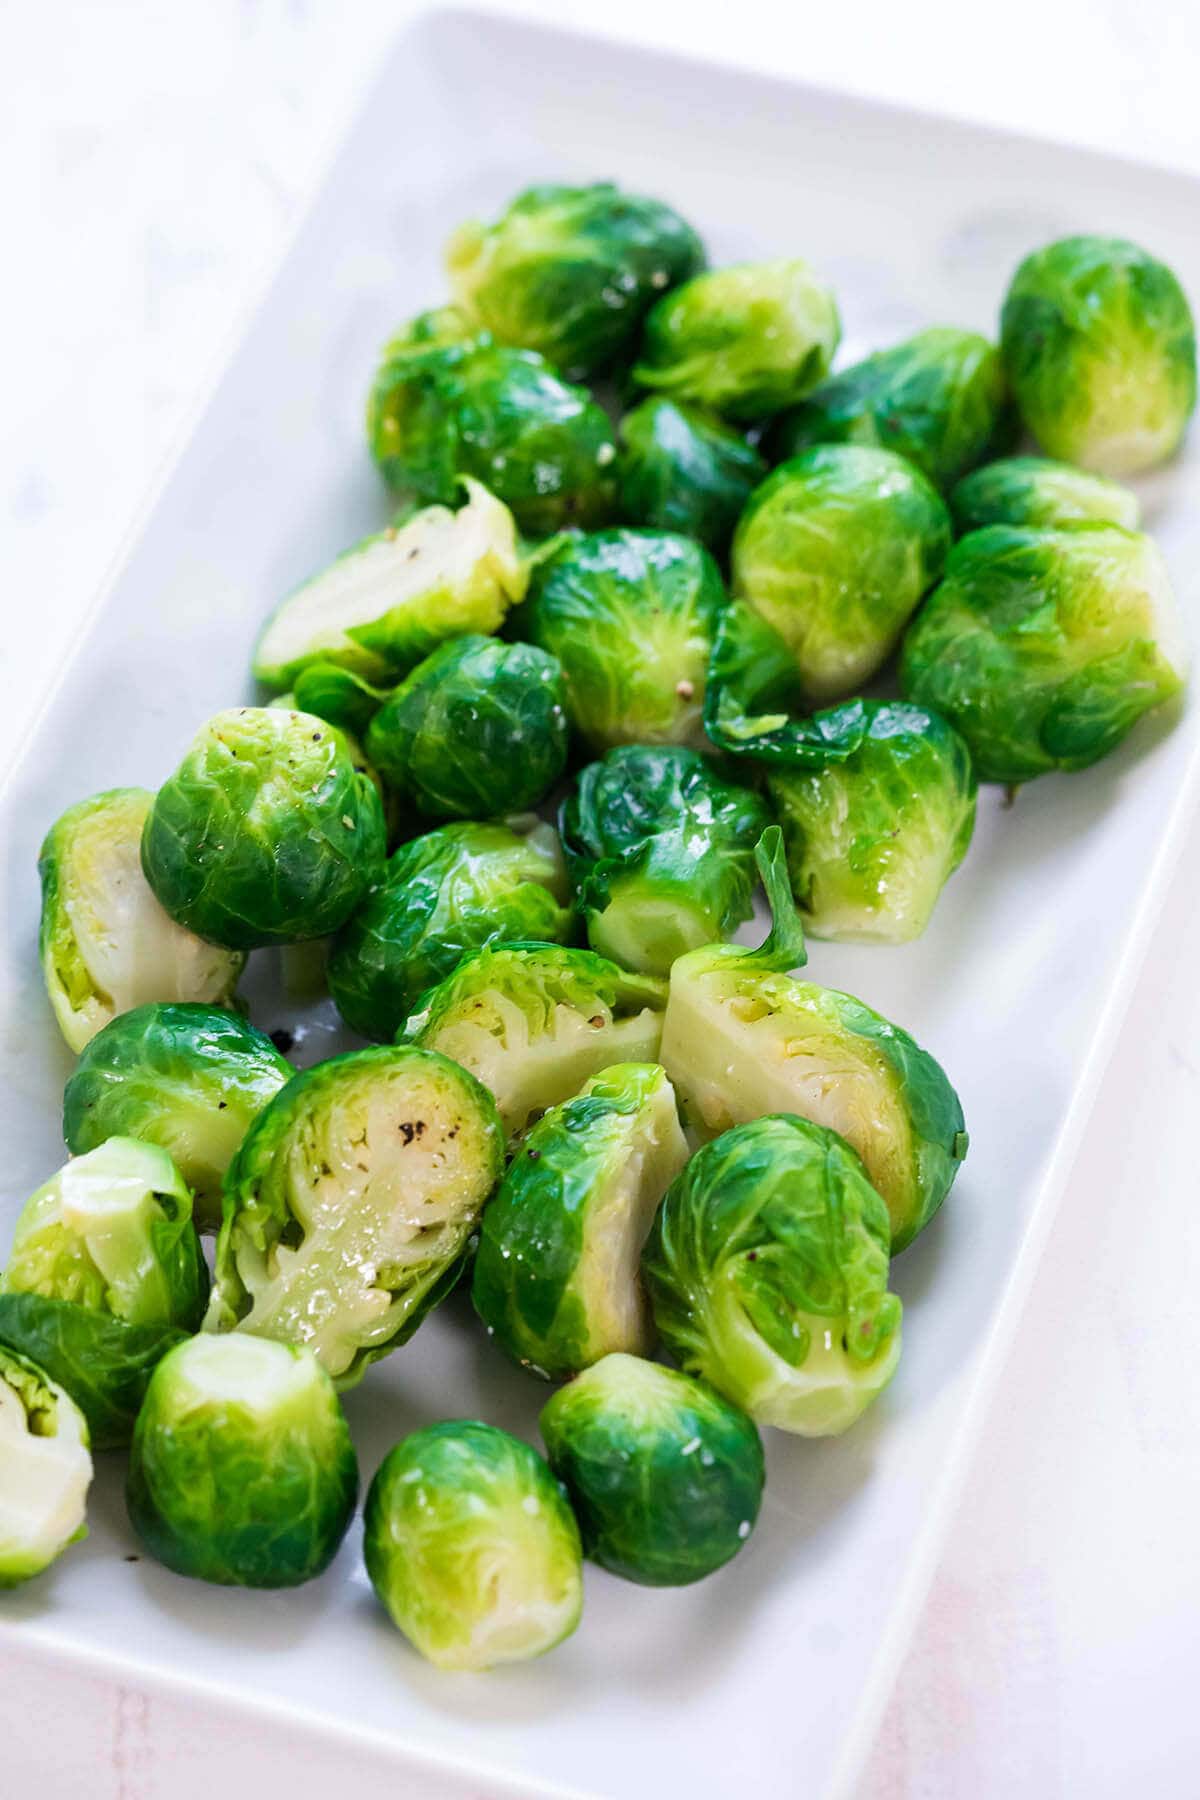 Cooked Brussels sprouts on platter